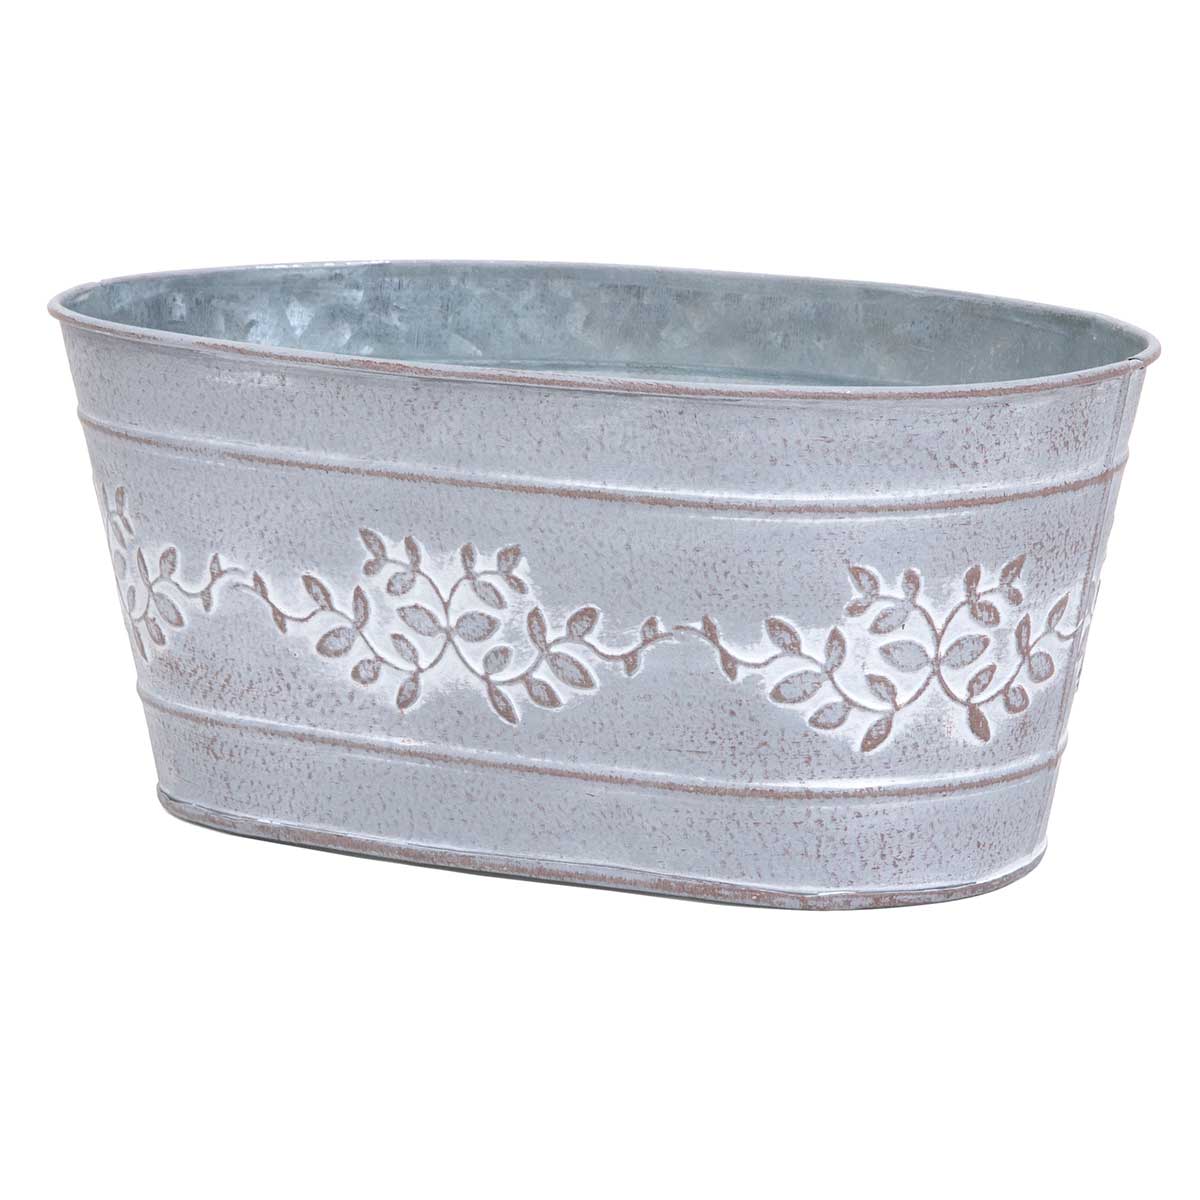 BUCKET PRIVET GREY OVAL 9.25IN X 5.25IN X 4.25IN METAL - Click Image to Close